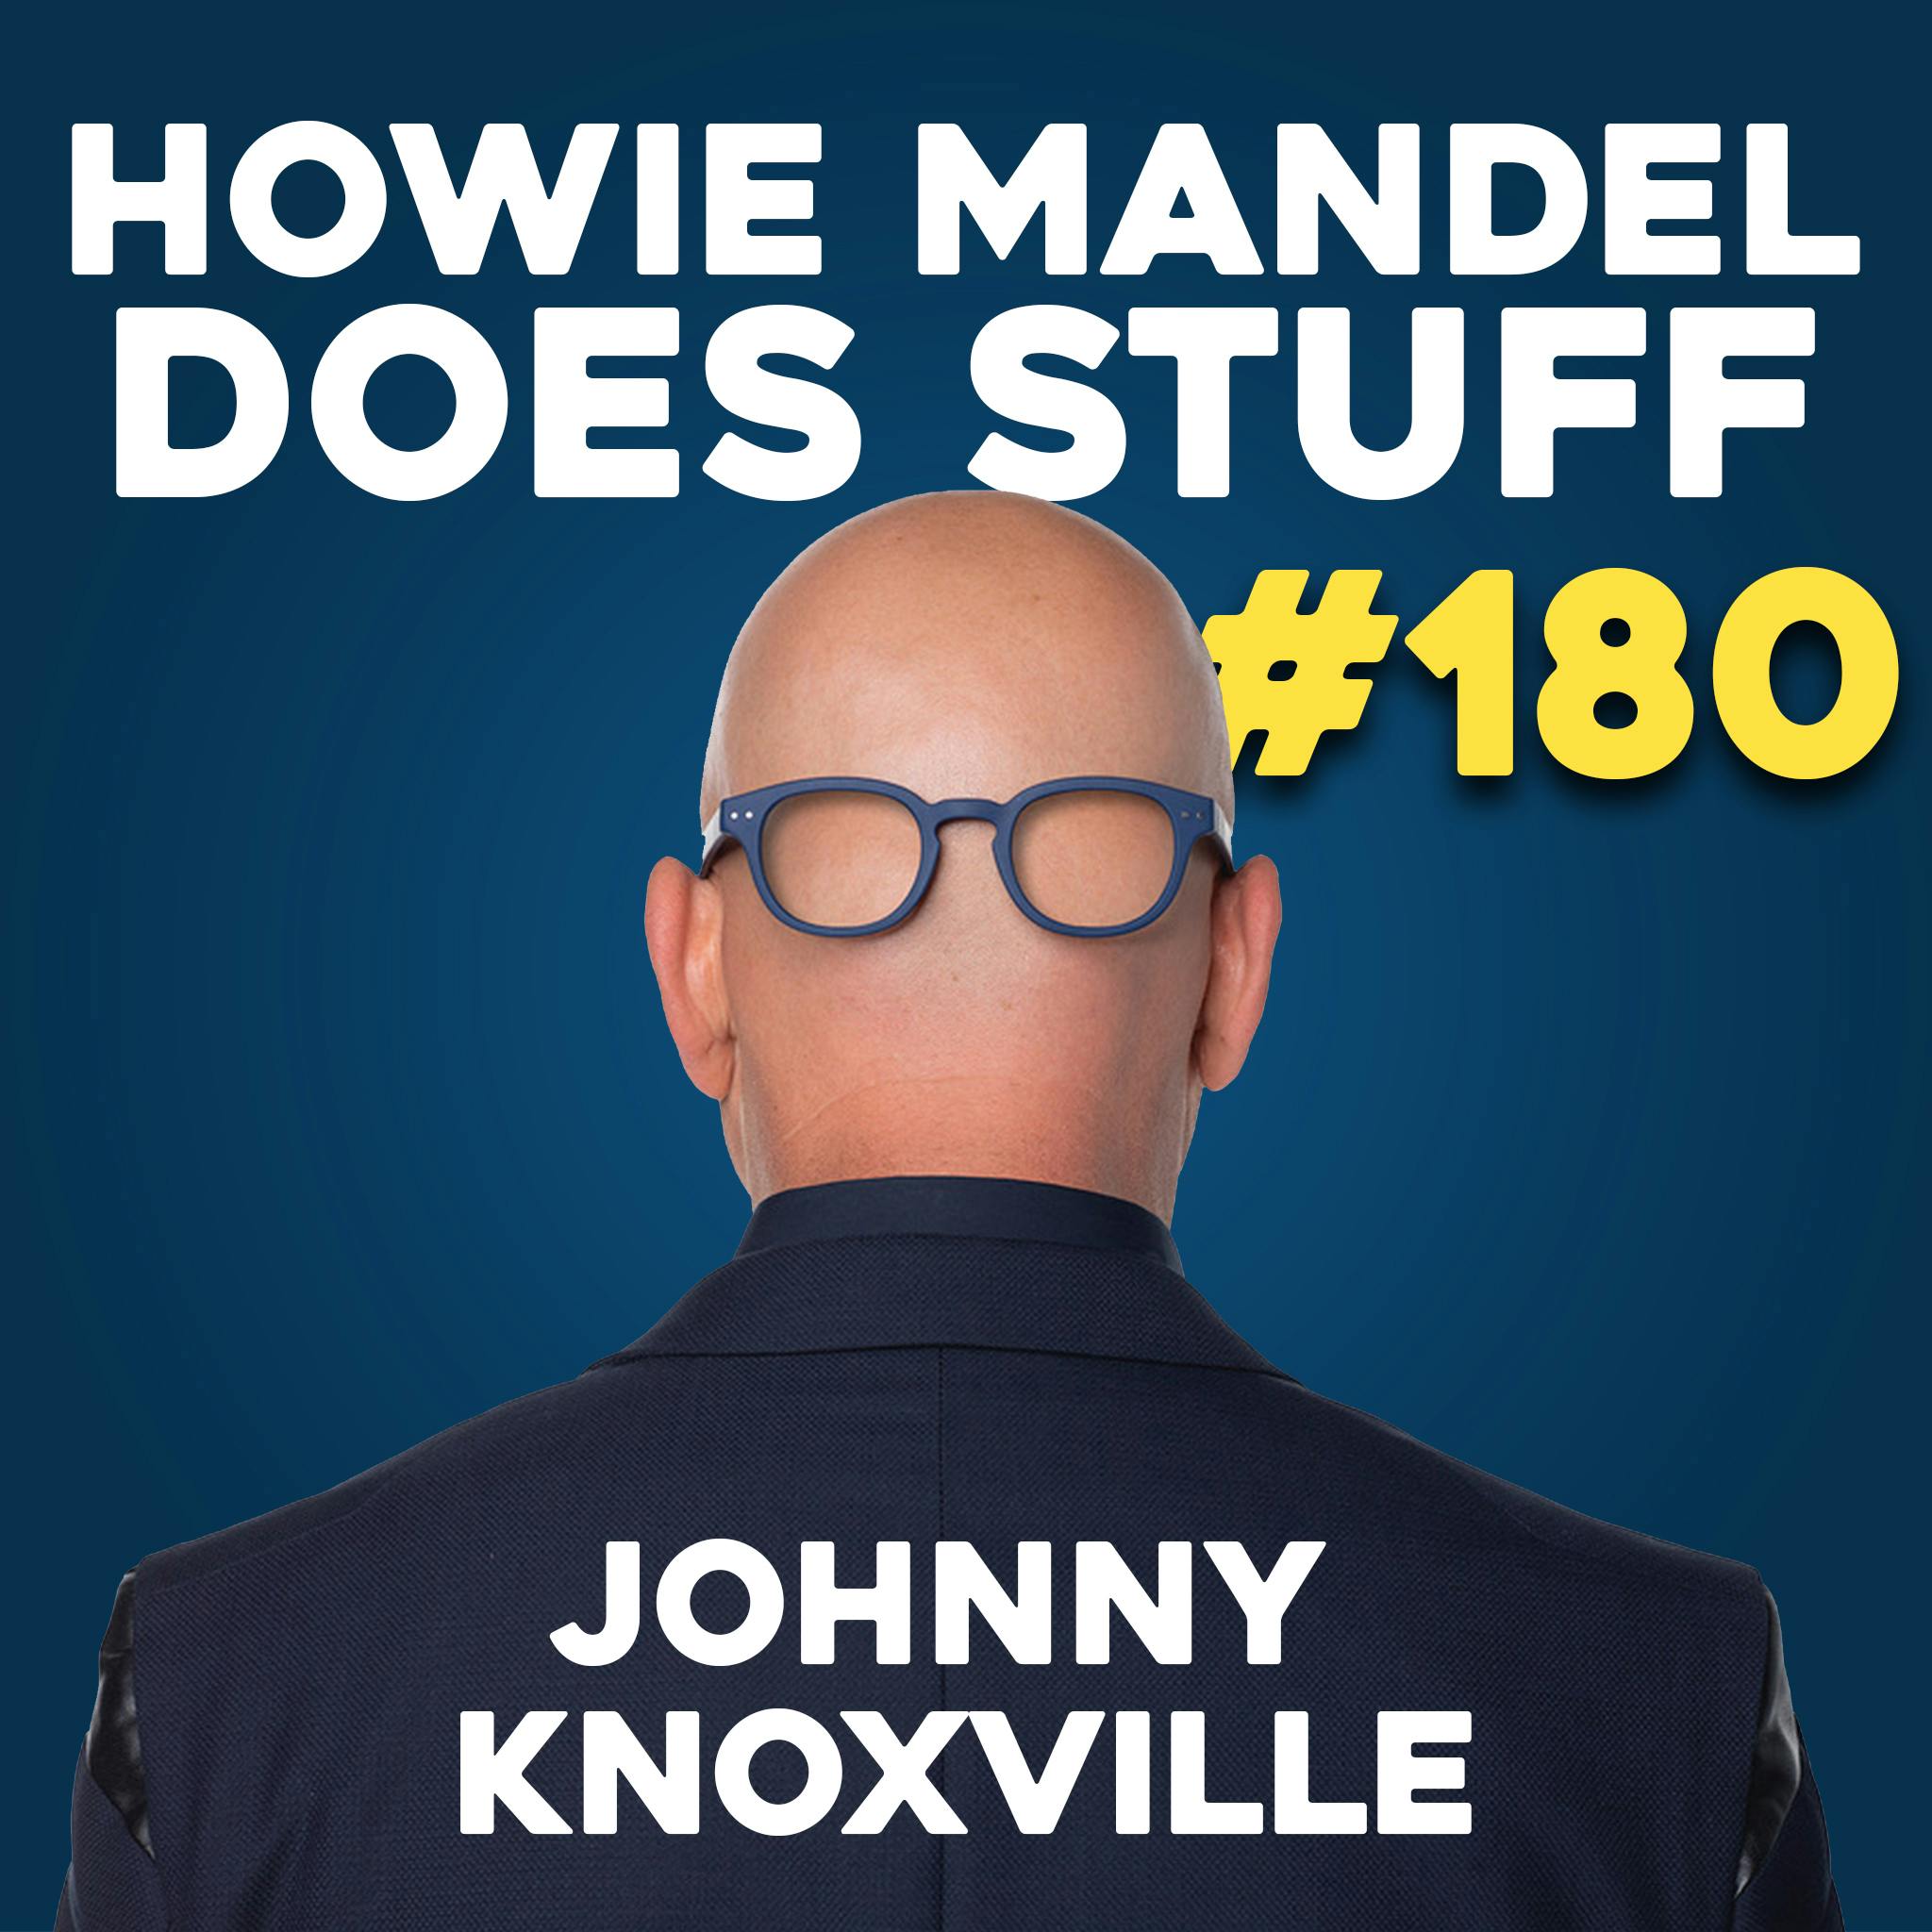 Johnny Knoxville | Howie Mandel Does Stuff